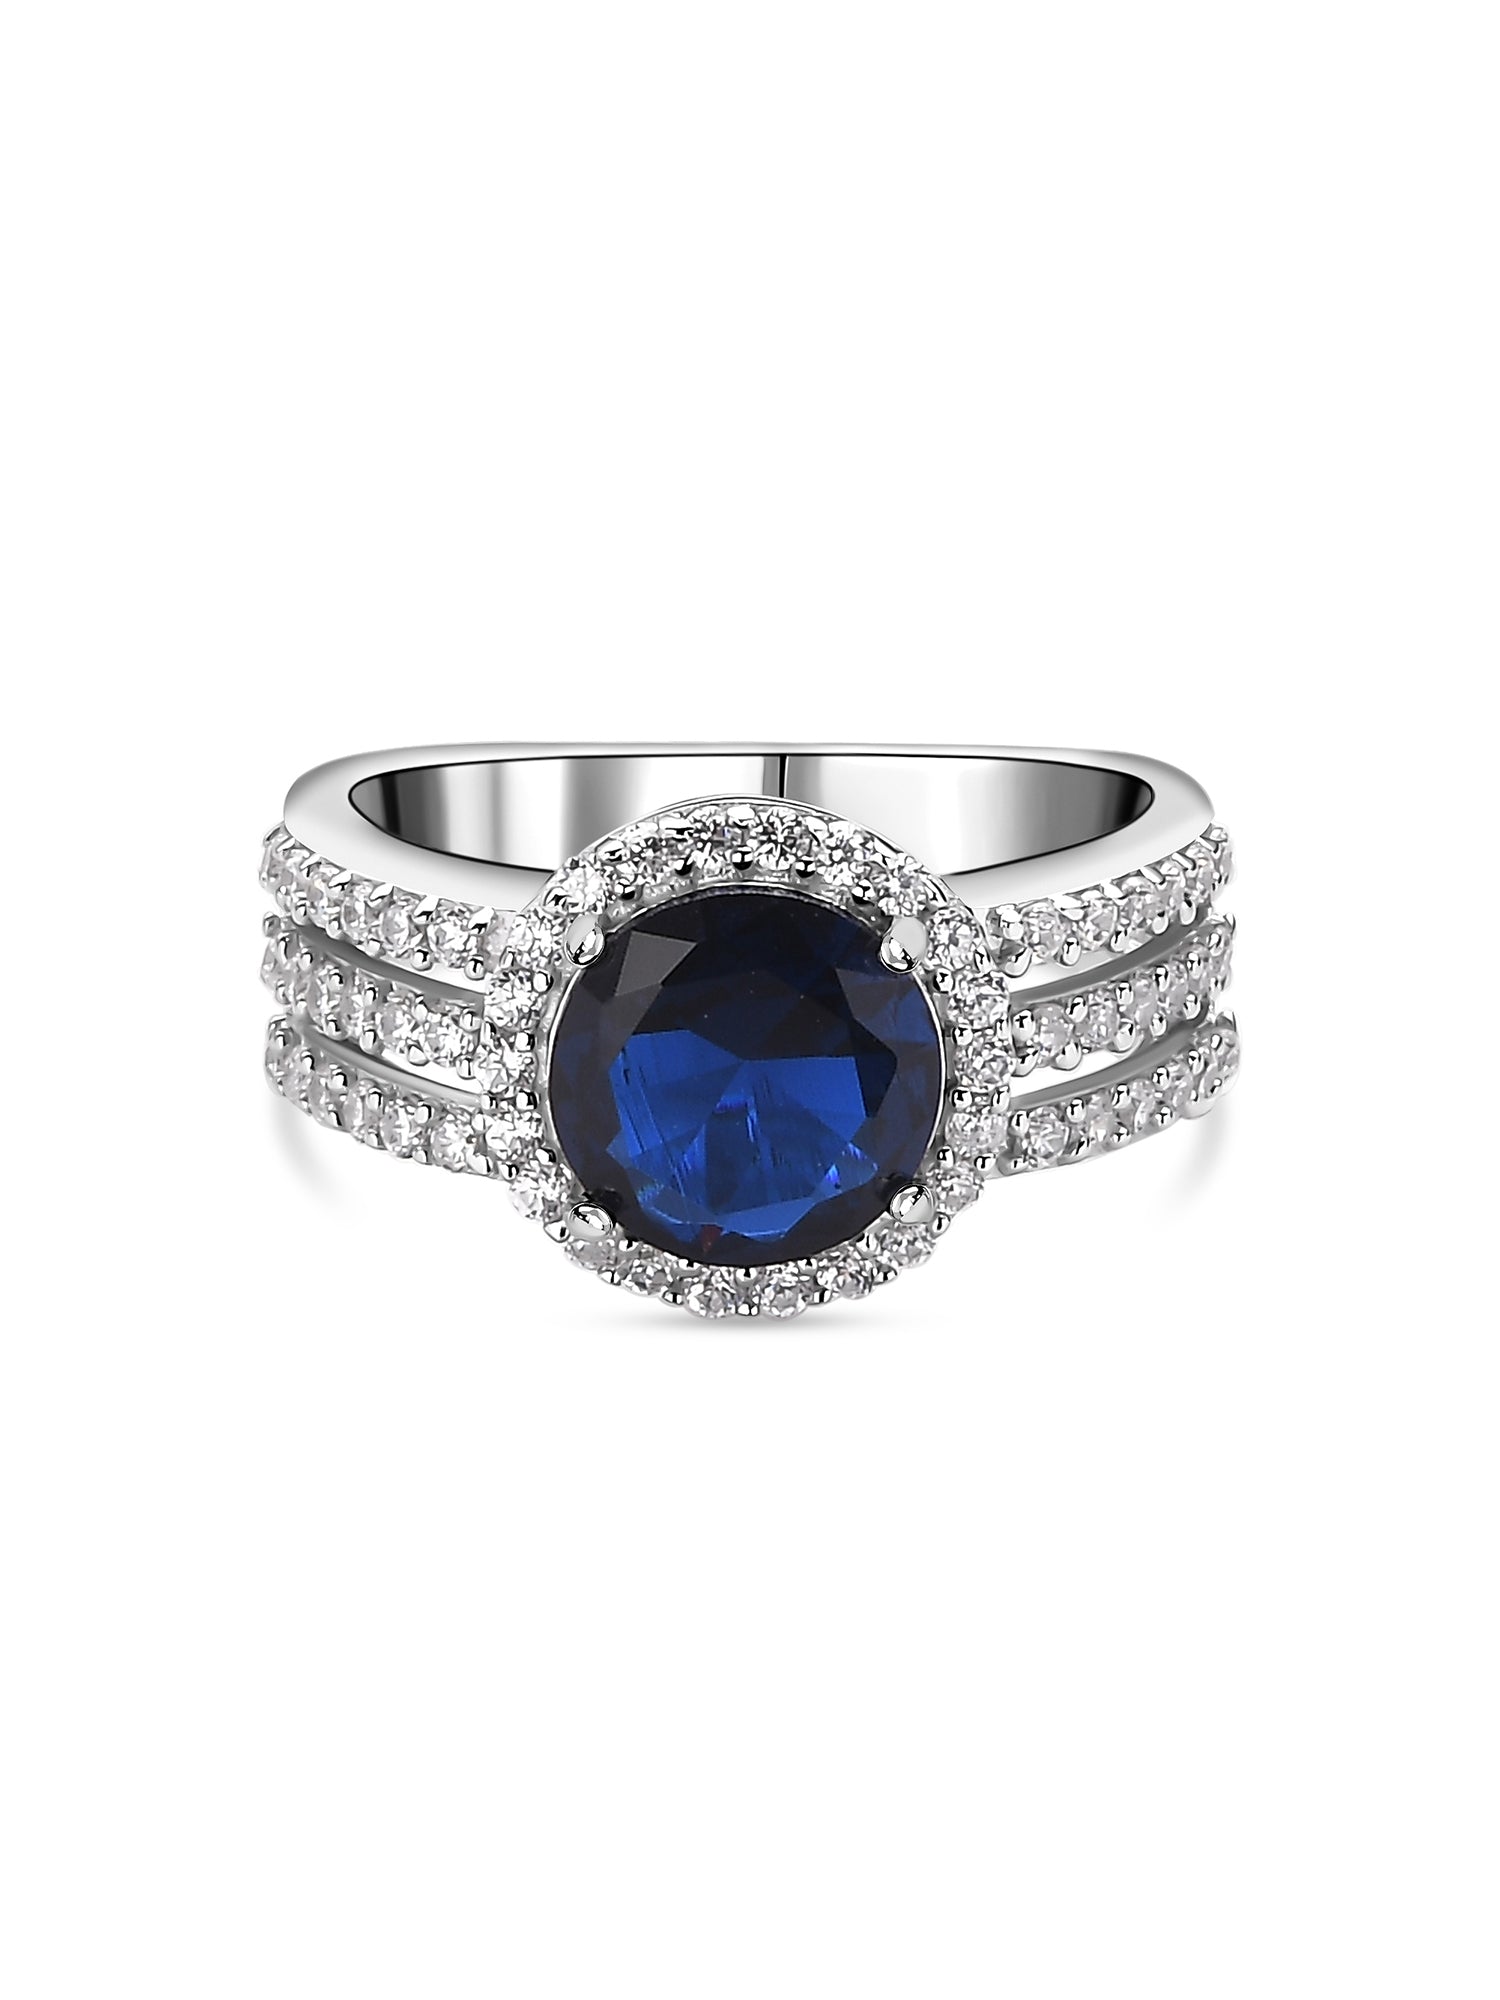 2 Carat Blue Sapphire Engagement Ring For Women In Silver